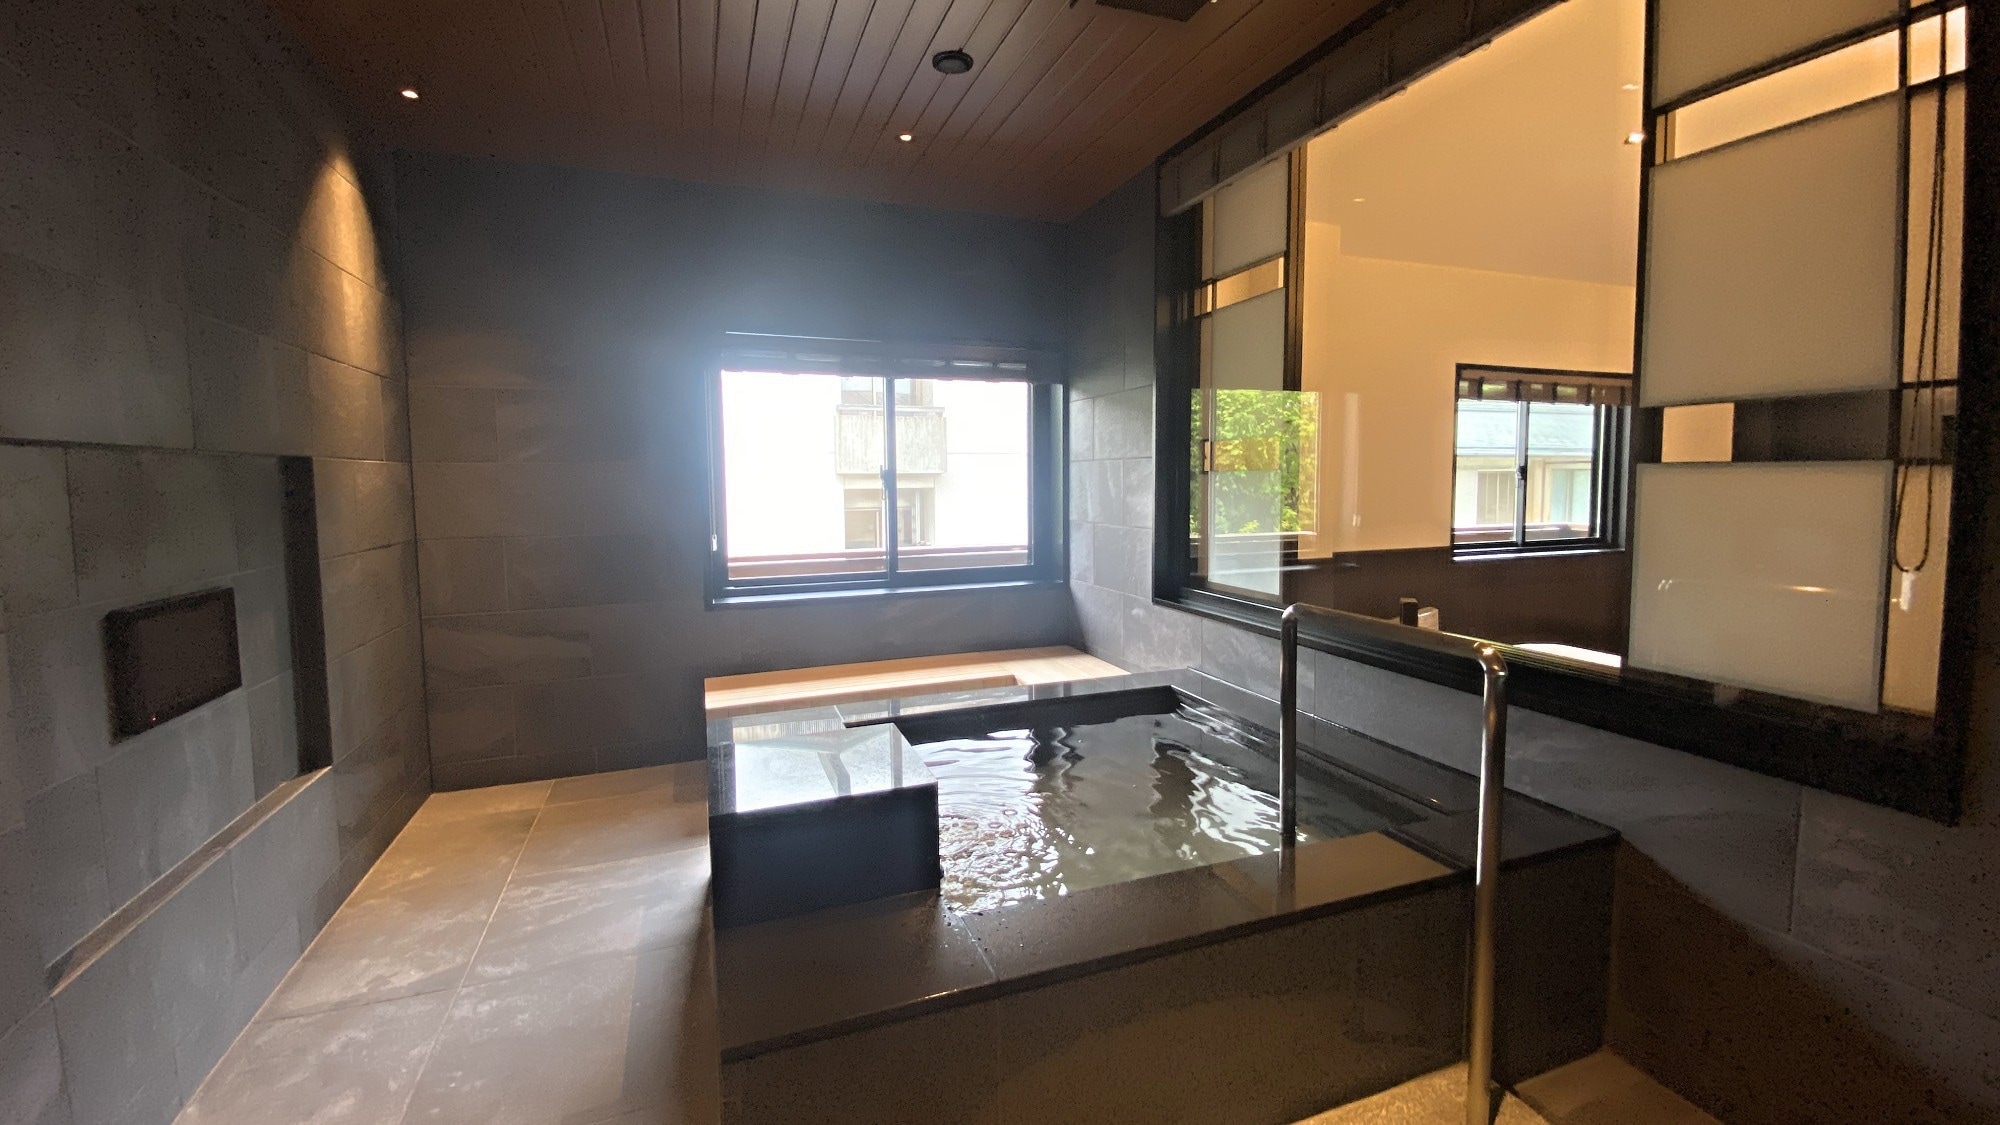 ◆ [With hot spring bath] Japanese-Western style room / Bathroom where you can enjoy hot springs in the guest room (example of guest room)